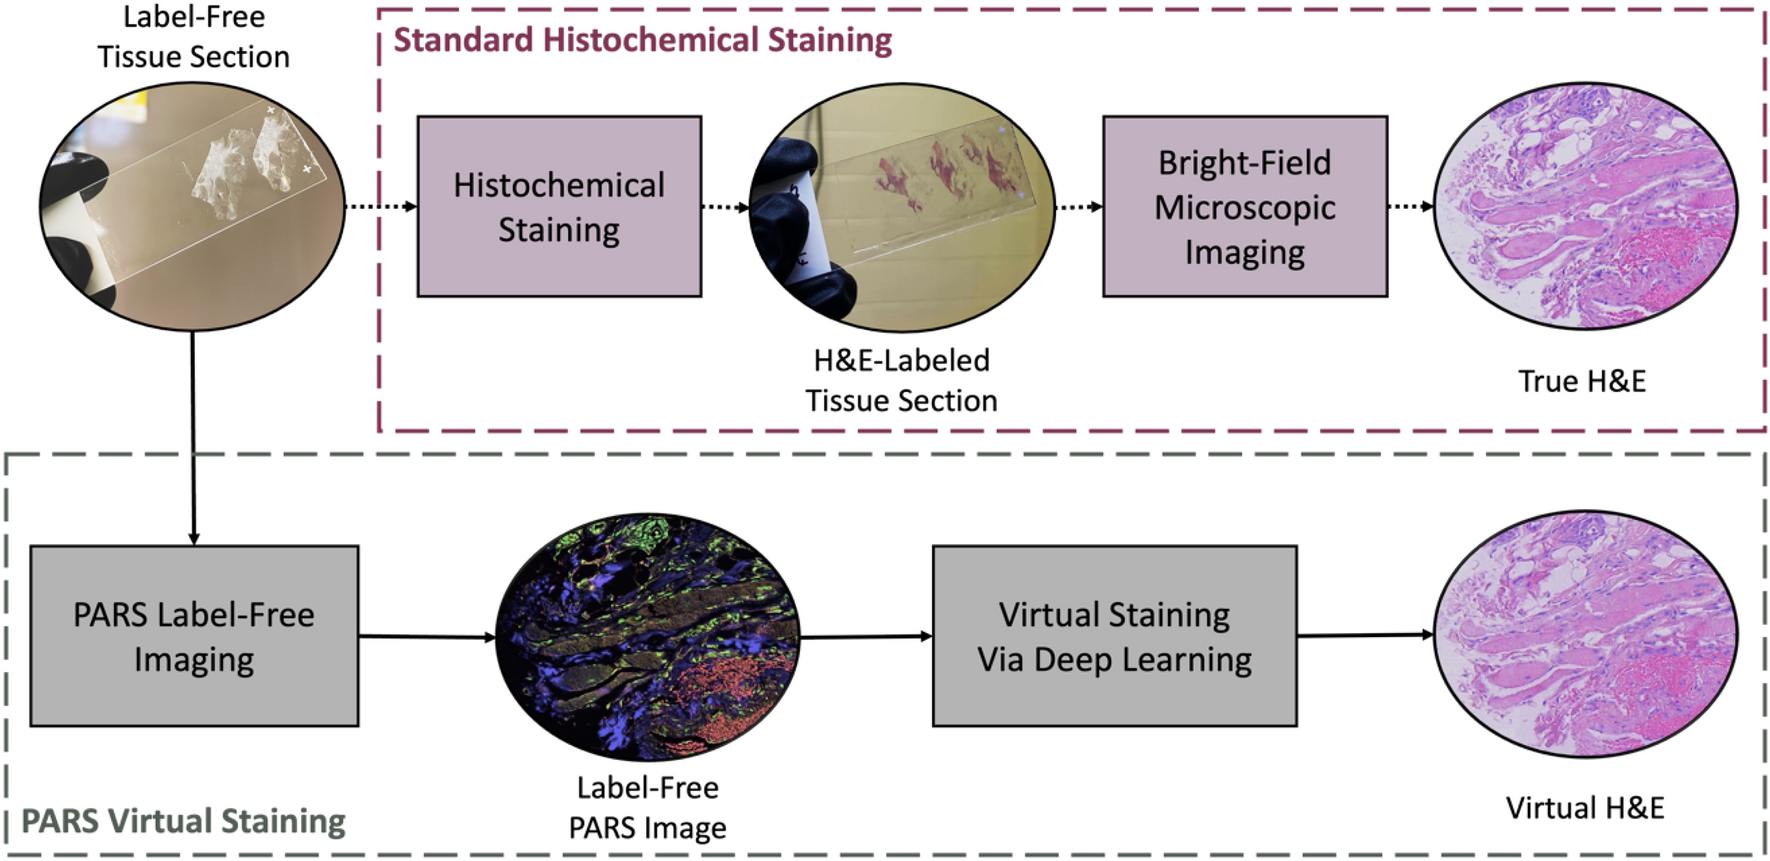 Multi-channel feature extraction for virtual histological staining